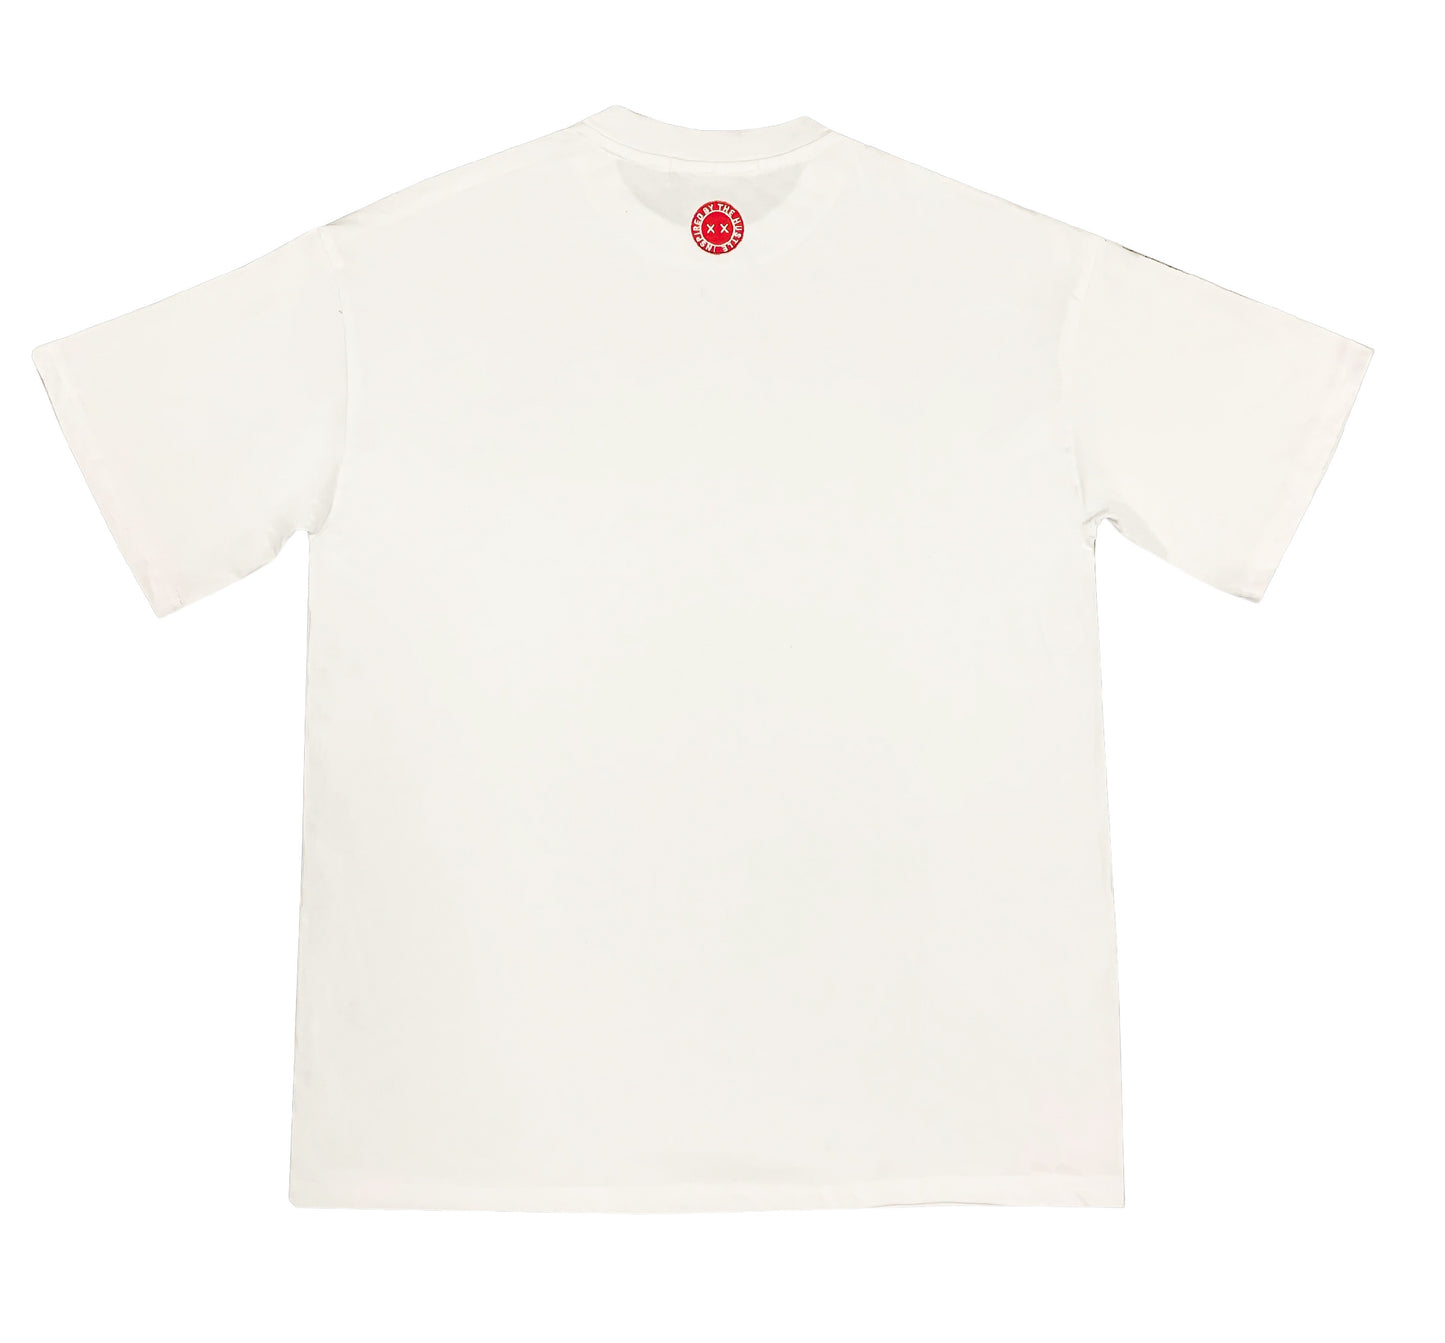 Undrafted Oversized T-Shirt White/Red*